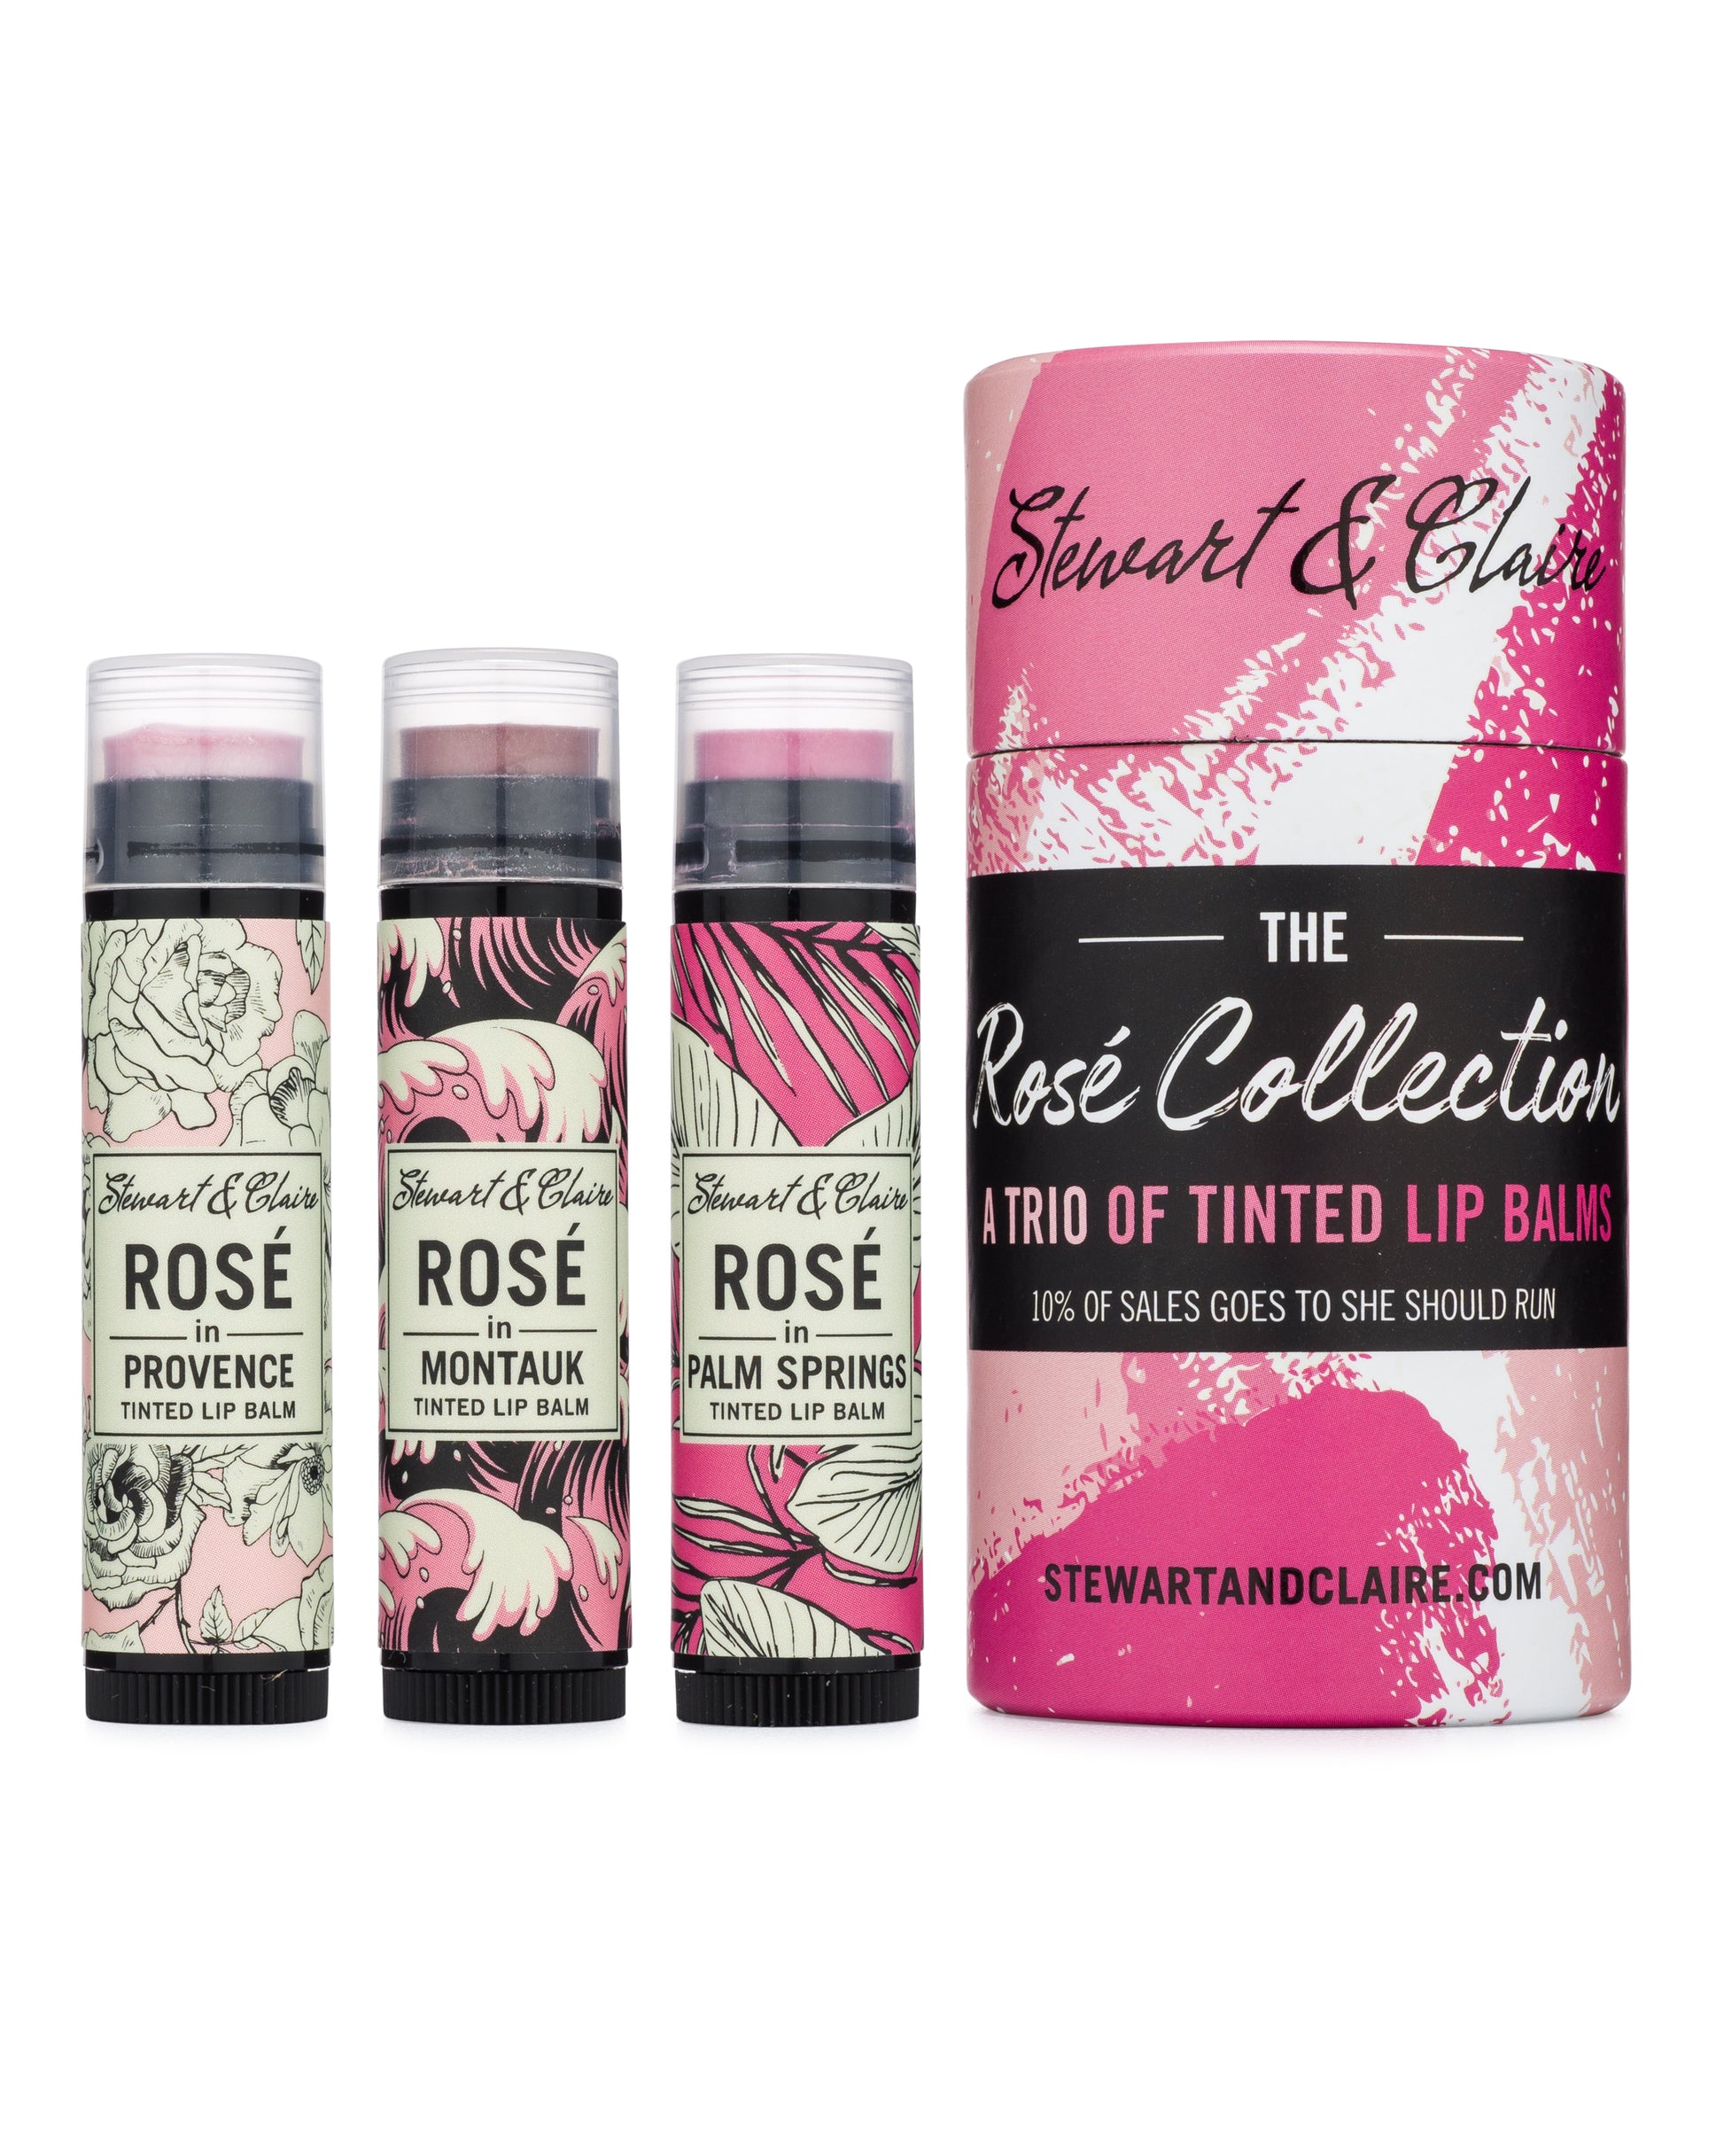 An image of three lip balms, each in black plastic tubes with clear tops. Each is a different color: From left to right: Rosé in Provence is Pale Pink, Rosé in Montauk is dusky pink, and Rosé in Palm Springs is bright pink. They are next to a larger paperboard tube with a design that looks like pink paint spatters all over it. The larger tube says The Rosé Collection: A Trio of Tinited Lip Balms